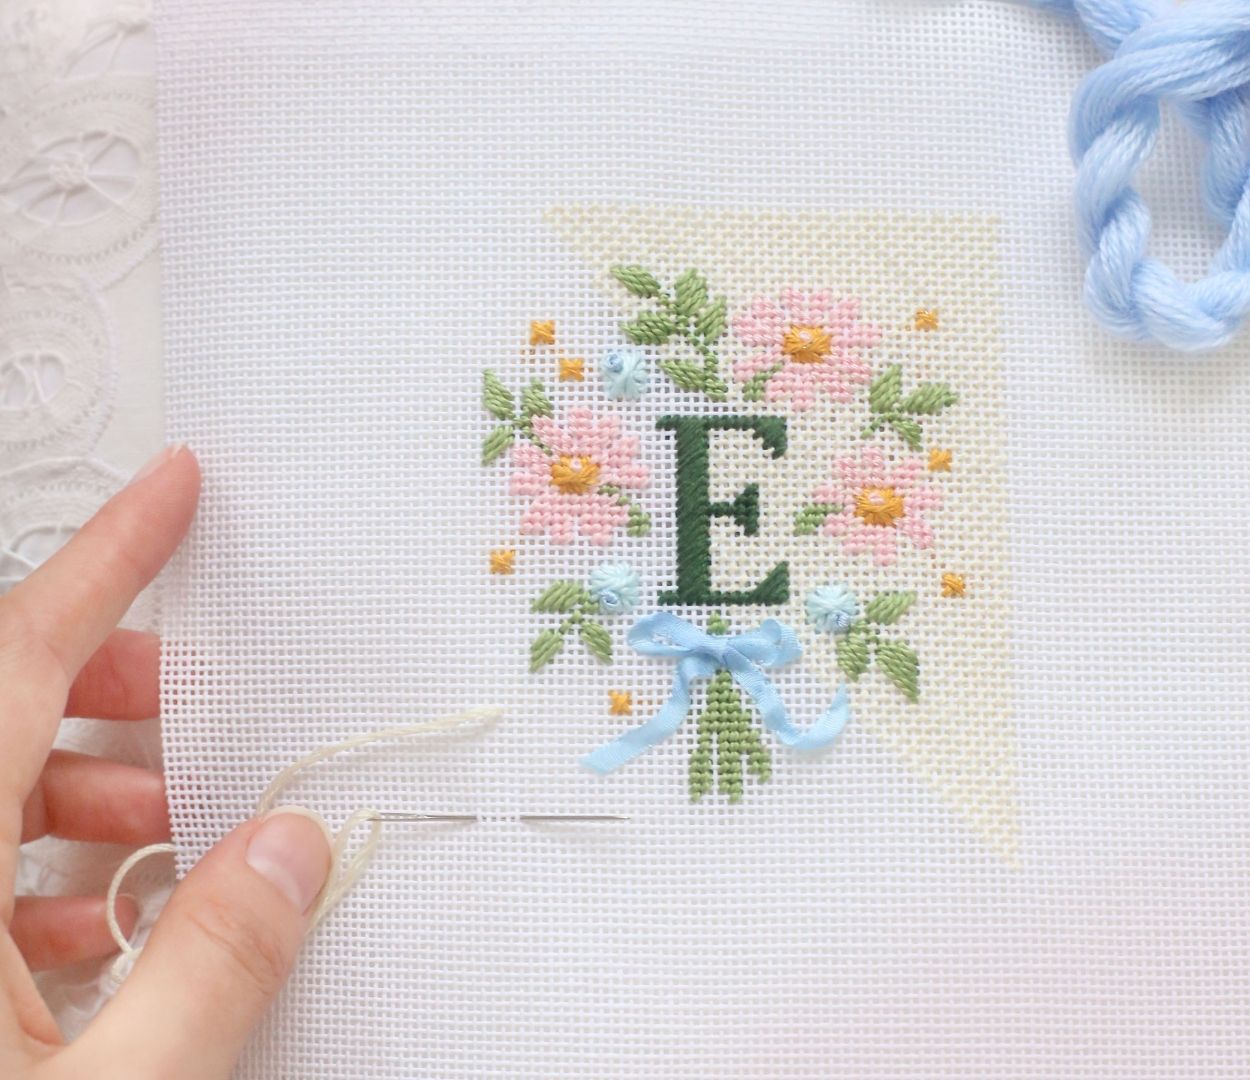 How To Paint a Needlepoint Canvas 